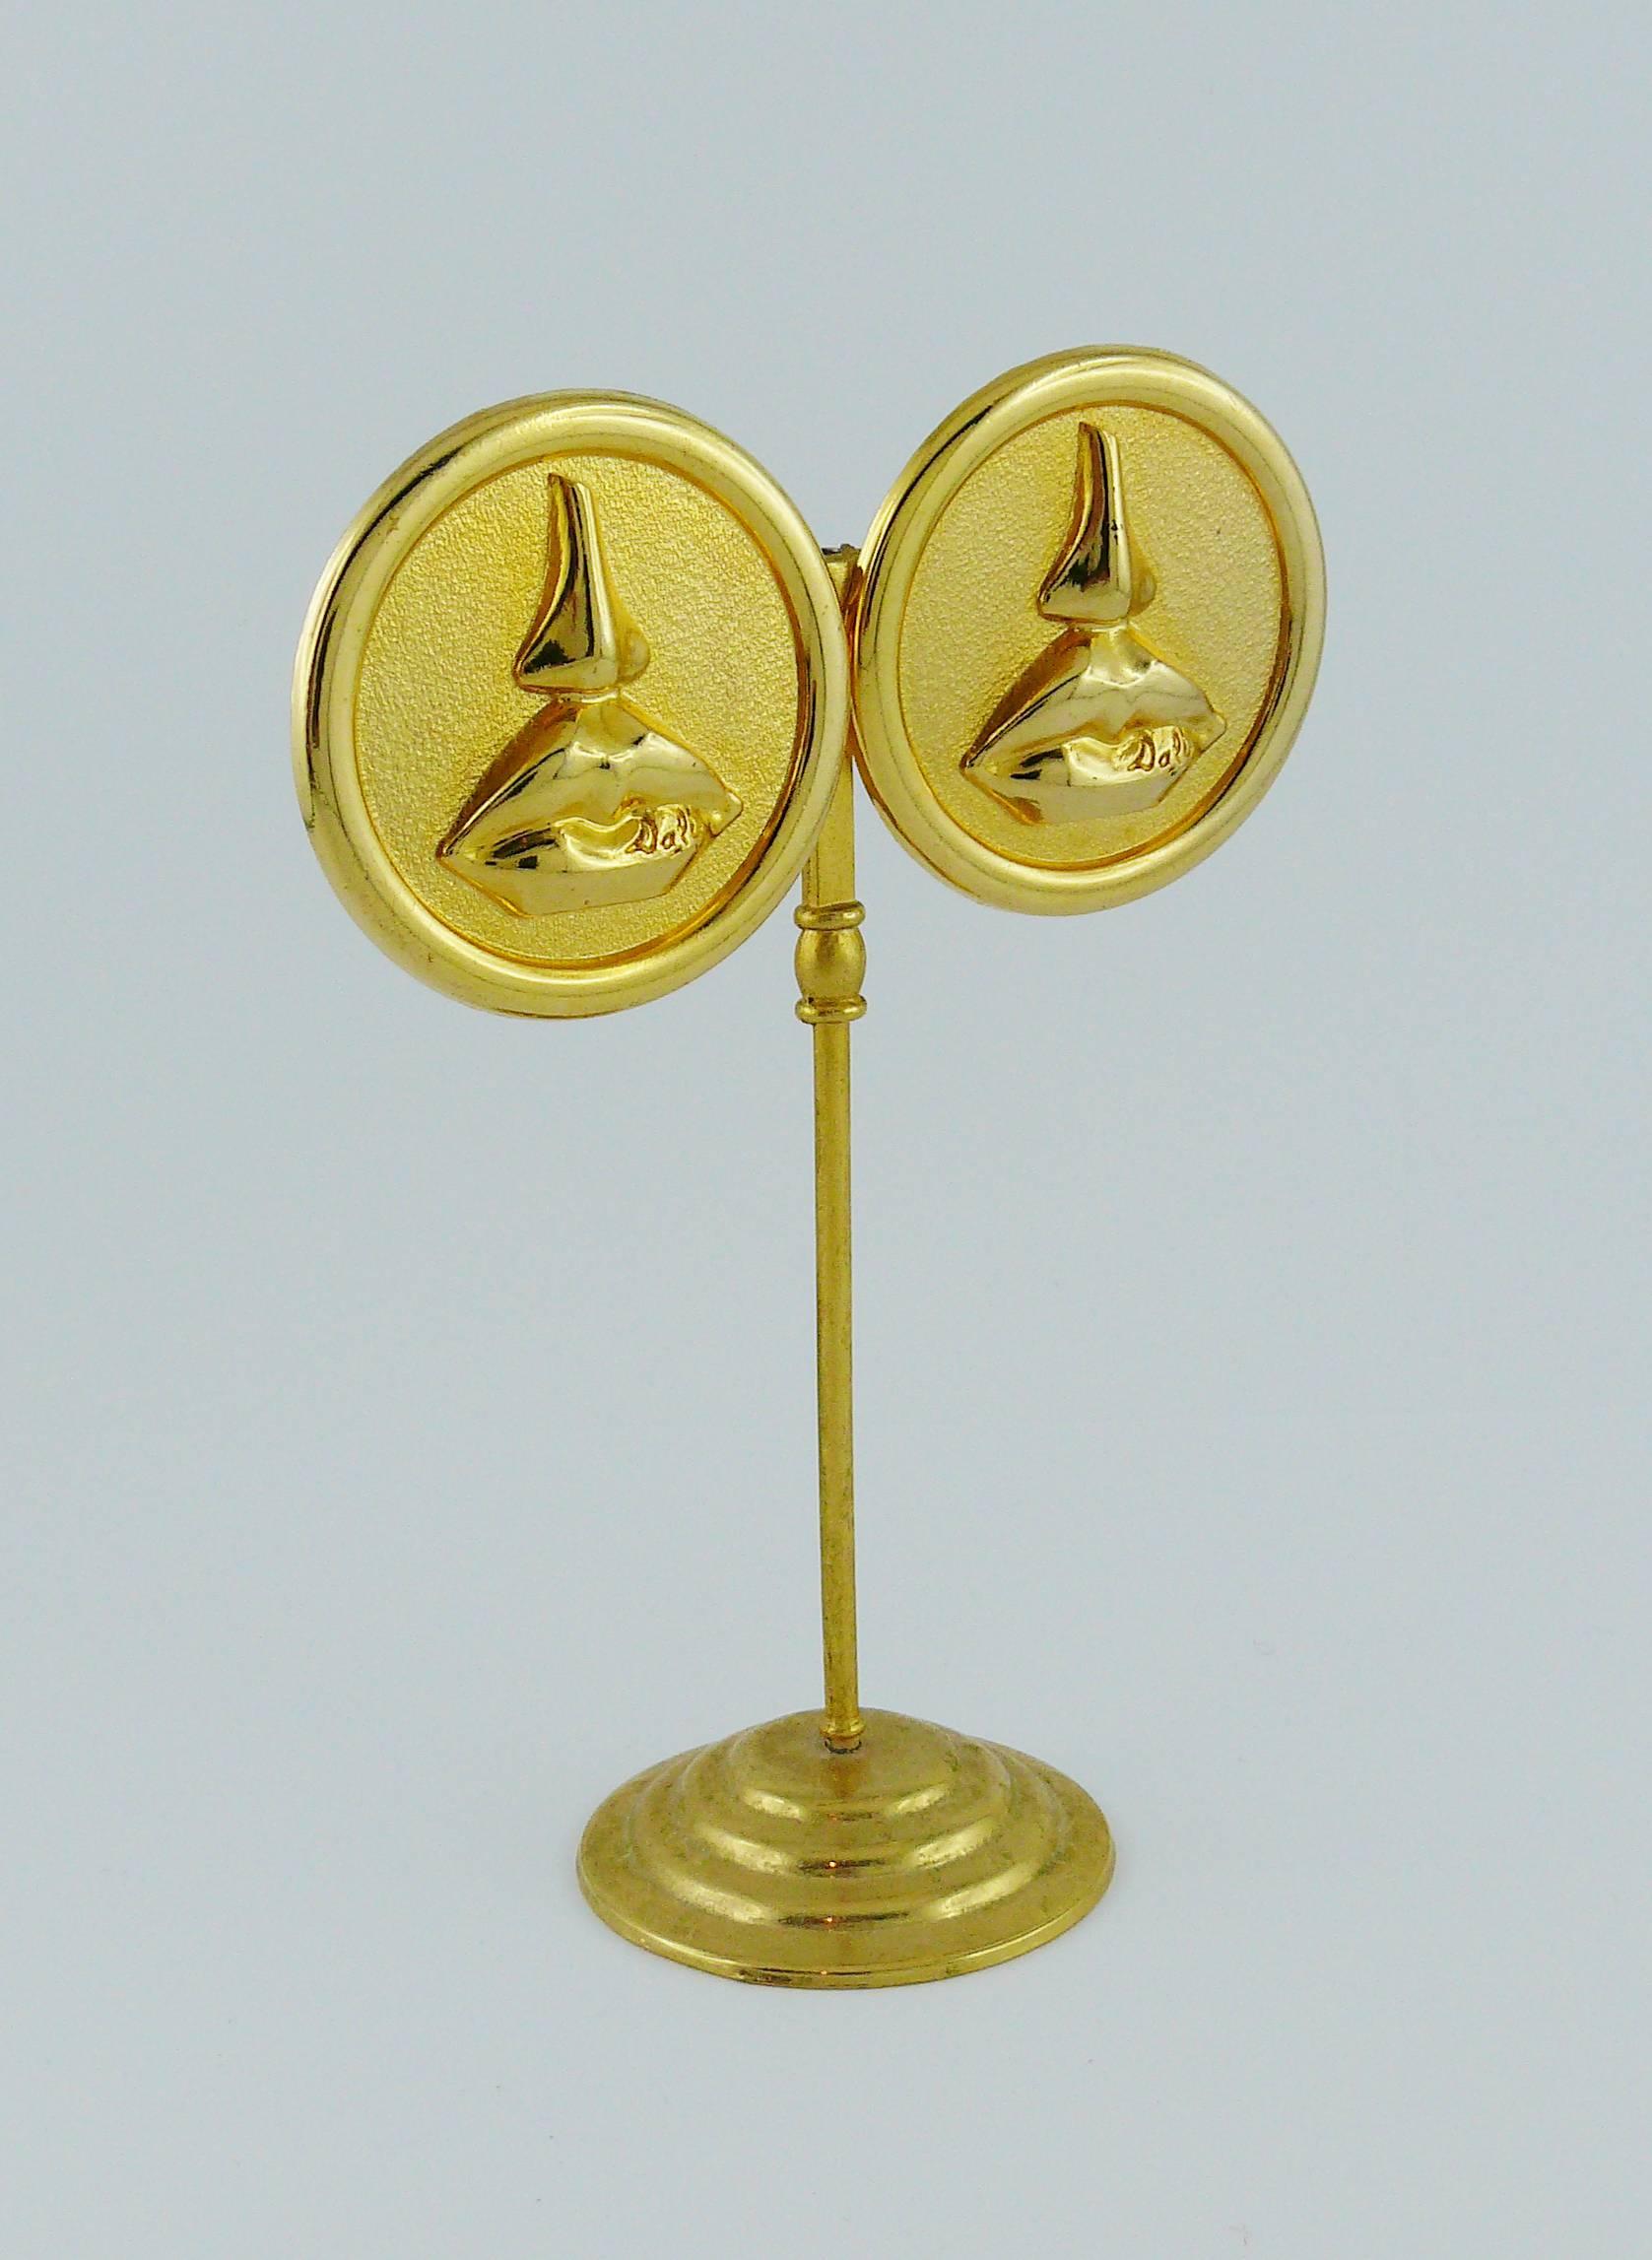 SALVADOR DALI Parfums vintage 1980's massive gold toned disc earrings (clip-on) featuring the iconic mouth and nose after Aphrodite of Cnidus.

Marked "Promotion Parfums SALVADOR DALI".

Indicative measurements : diameter approx. 4 cm